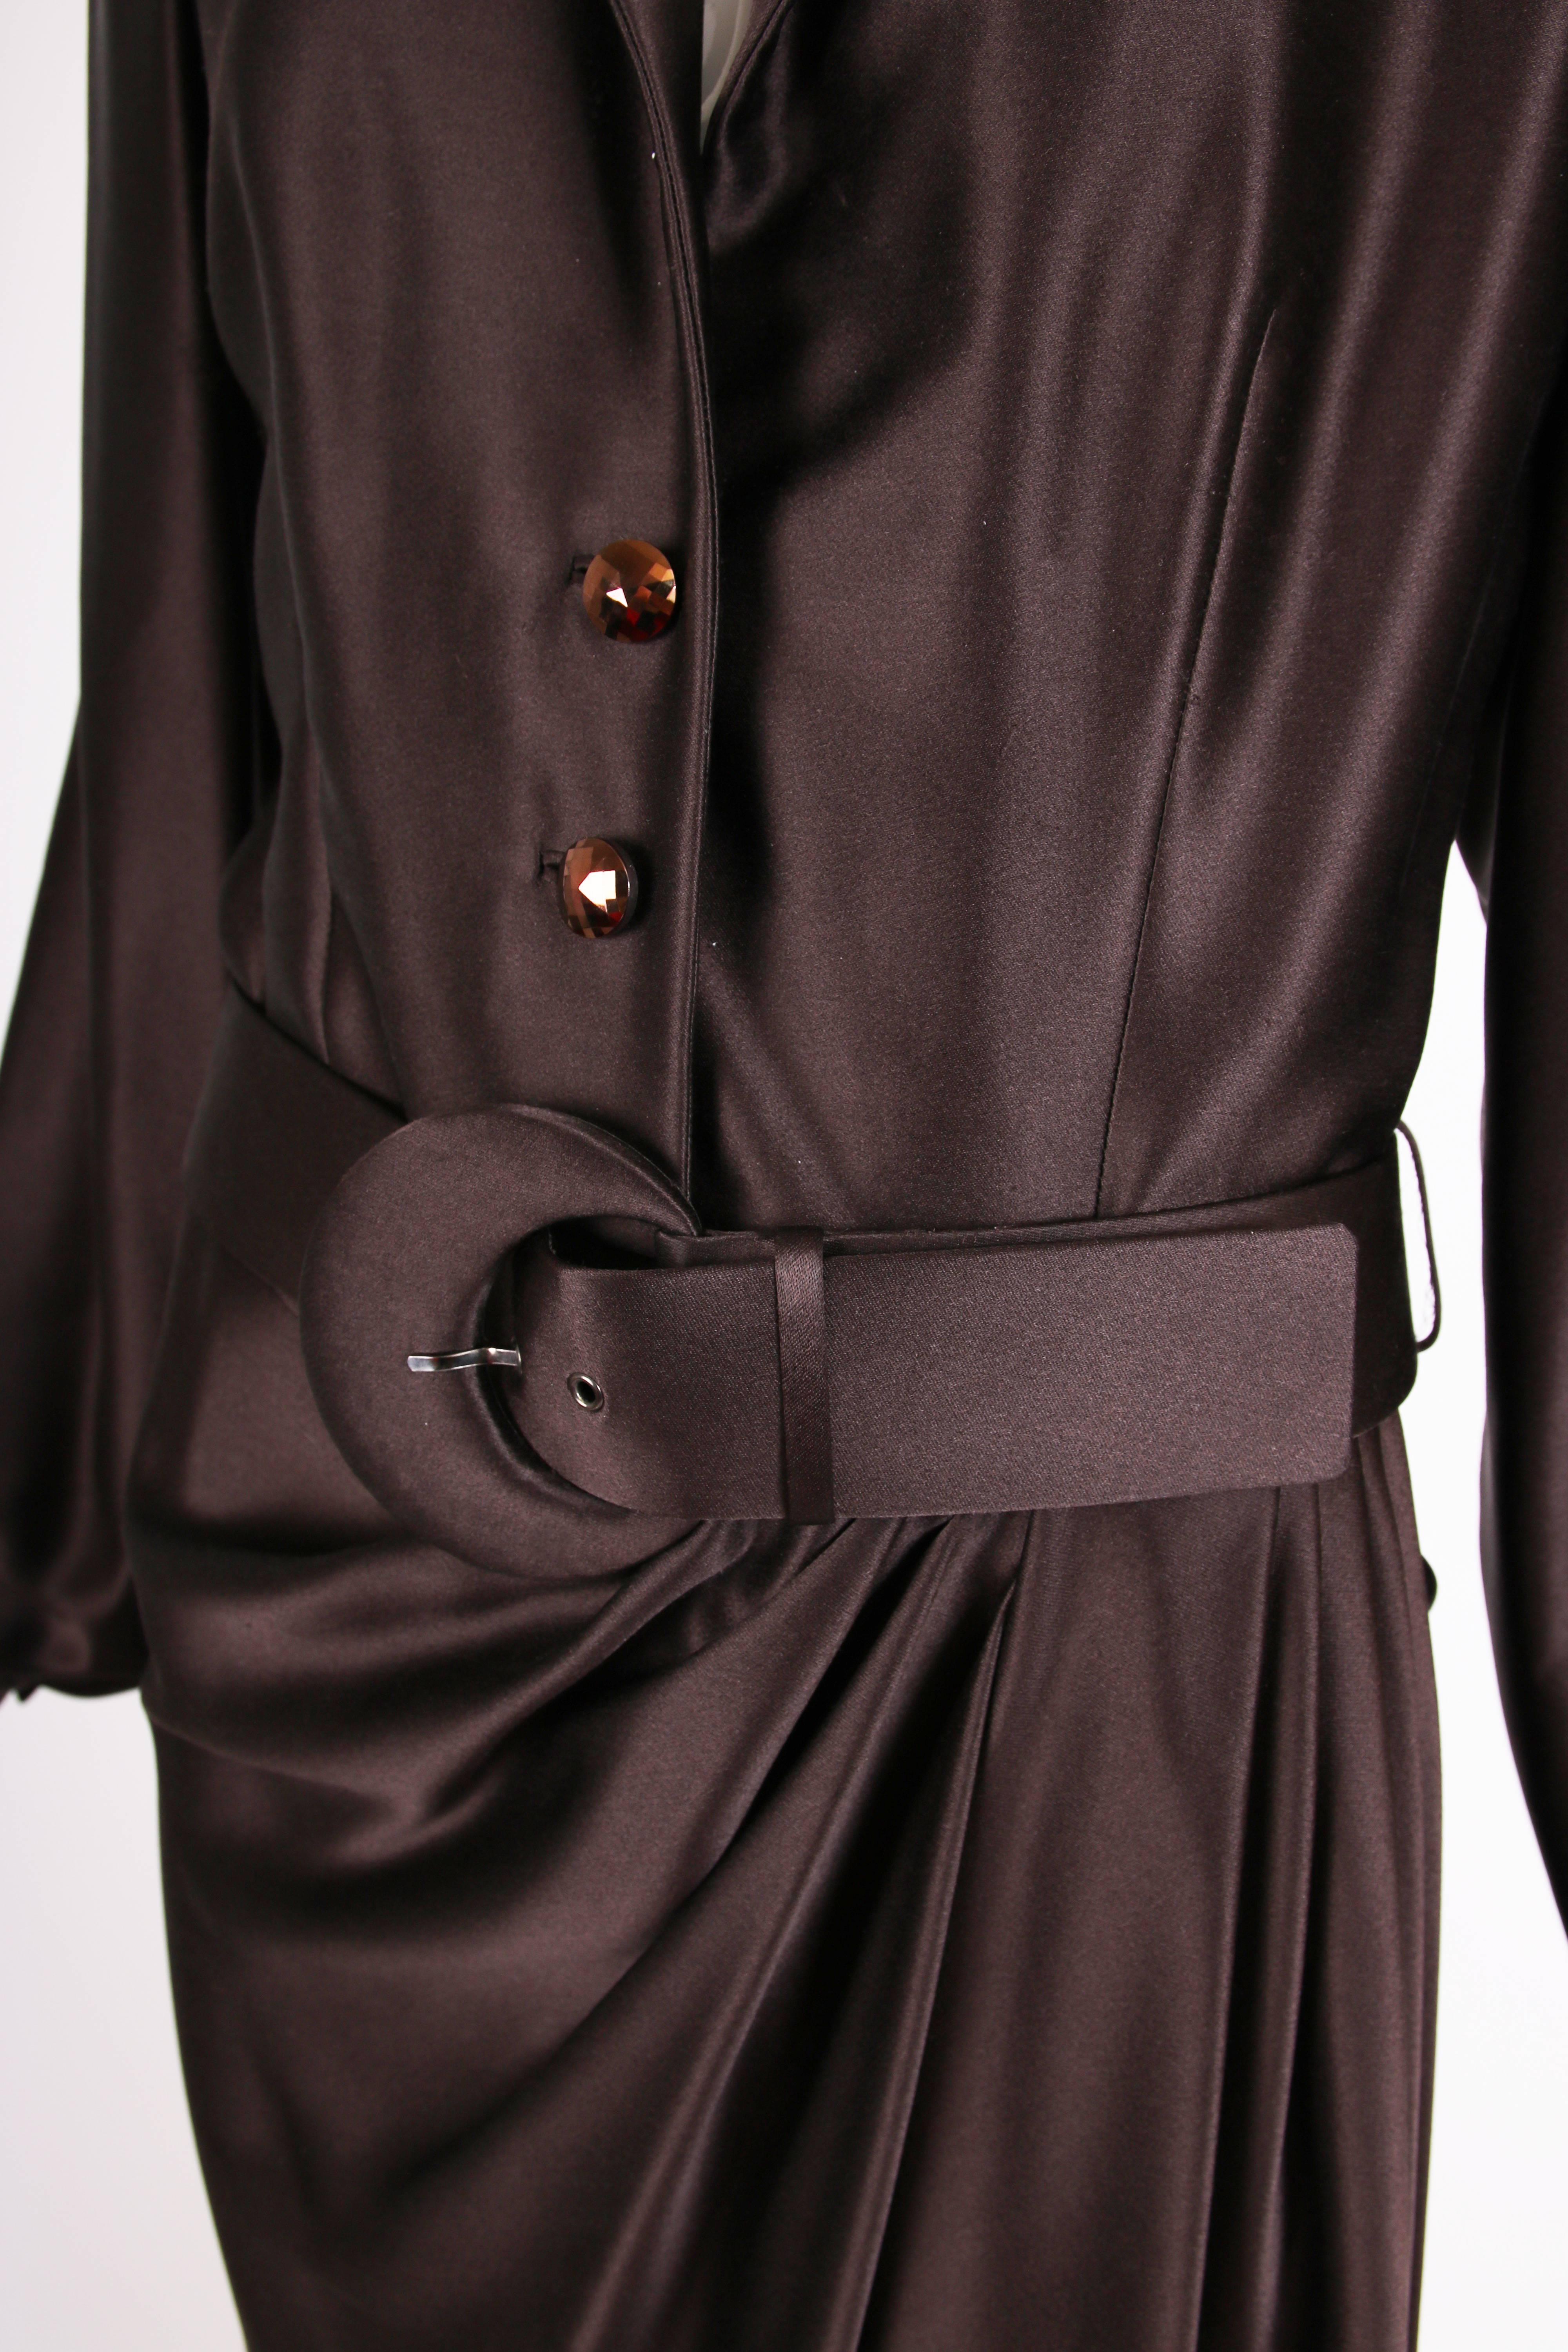 Yves Saint Laurent YSL Haute Couture Brown Silk Gown with Matching Belt, 1989  1